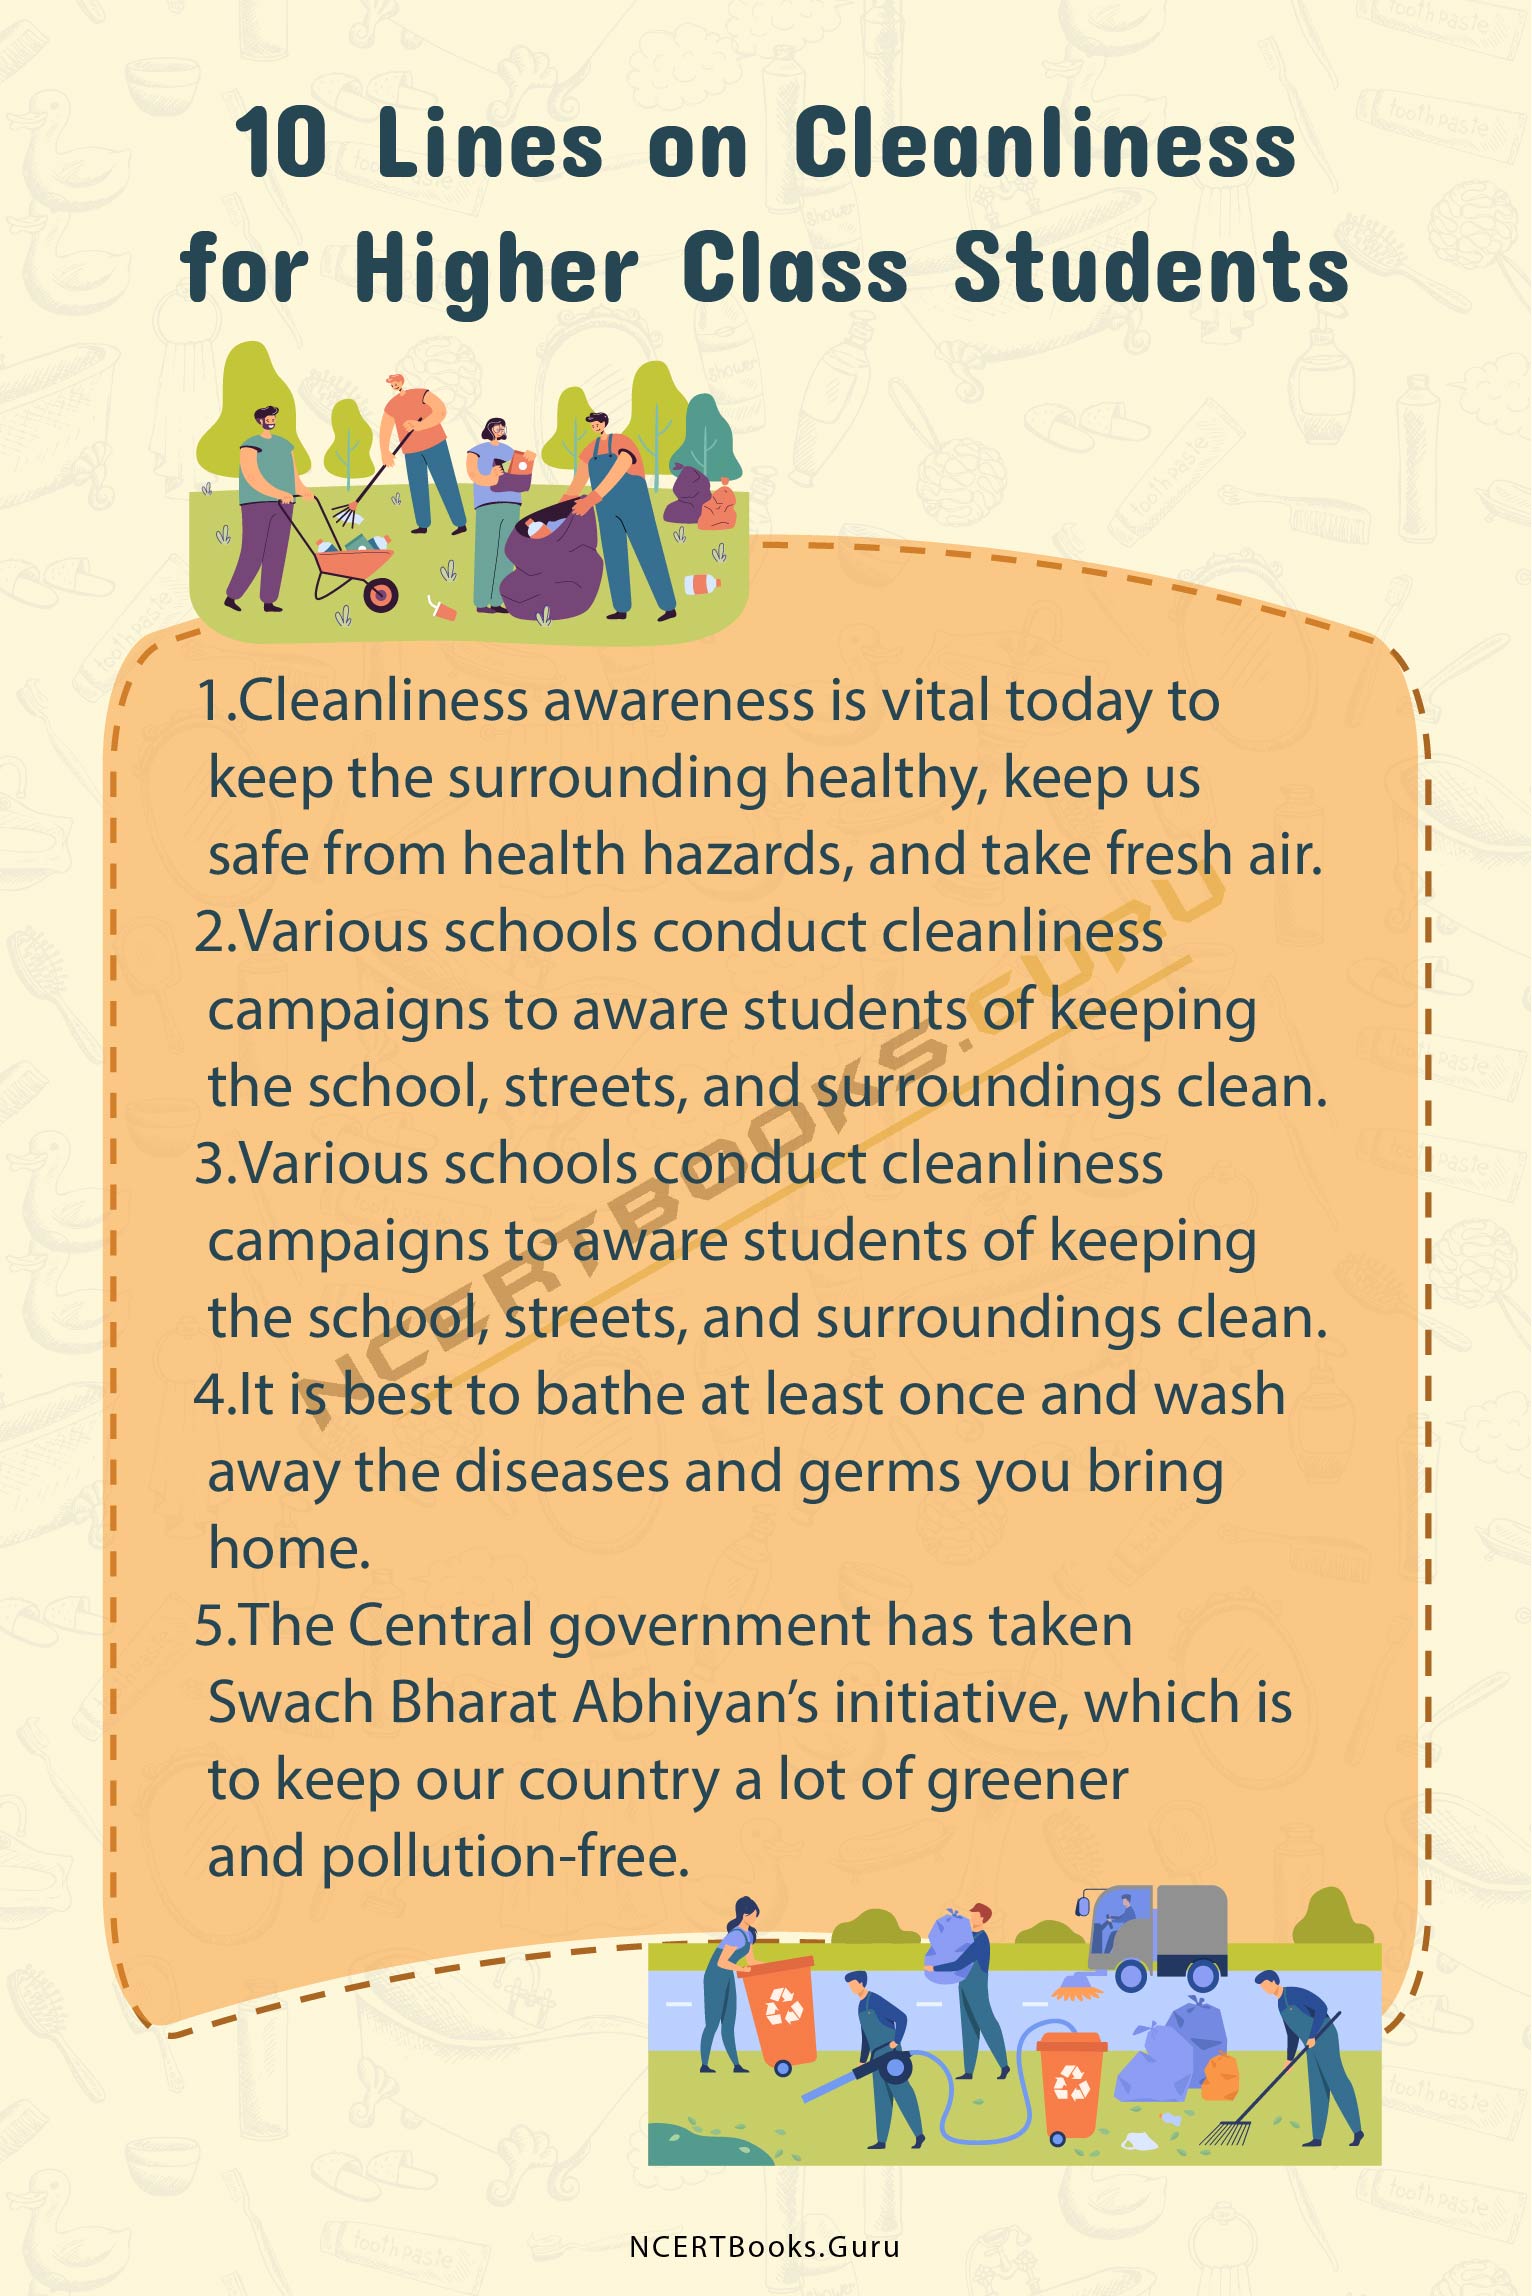 10 Lines on Cleanliness 2